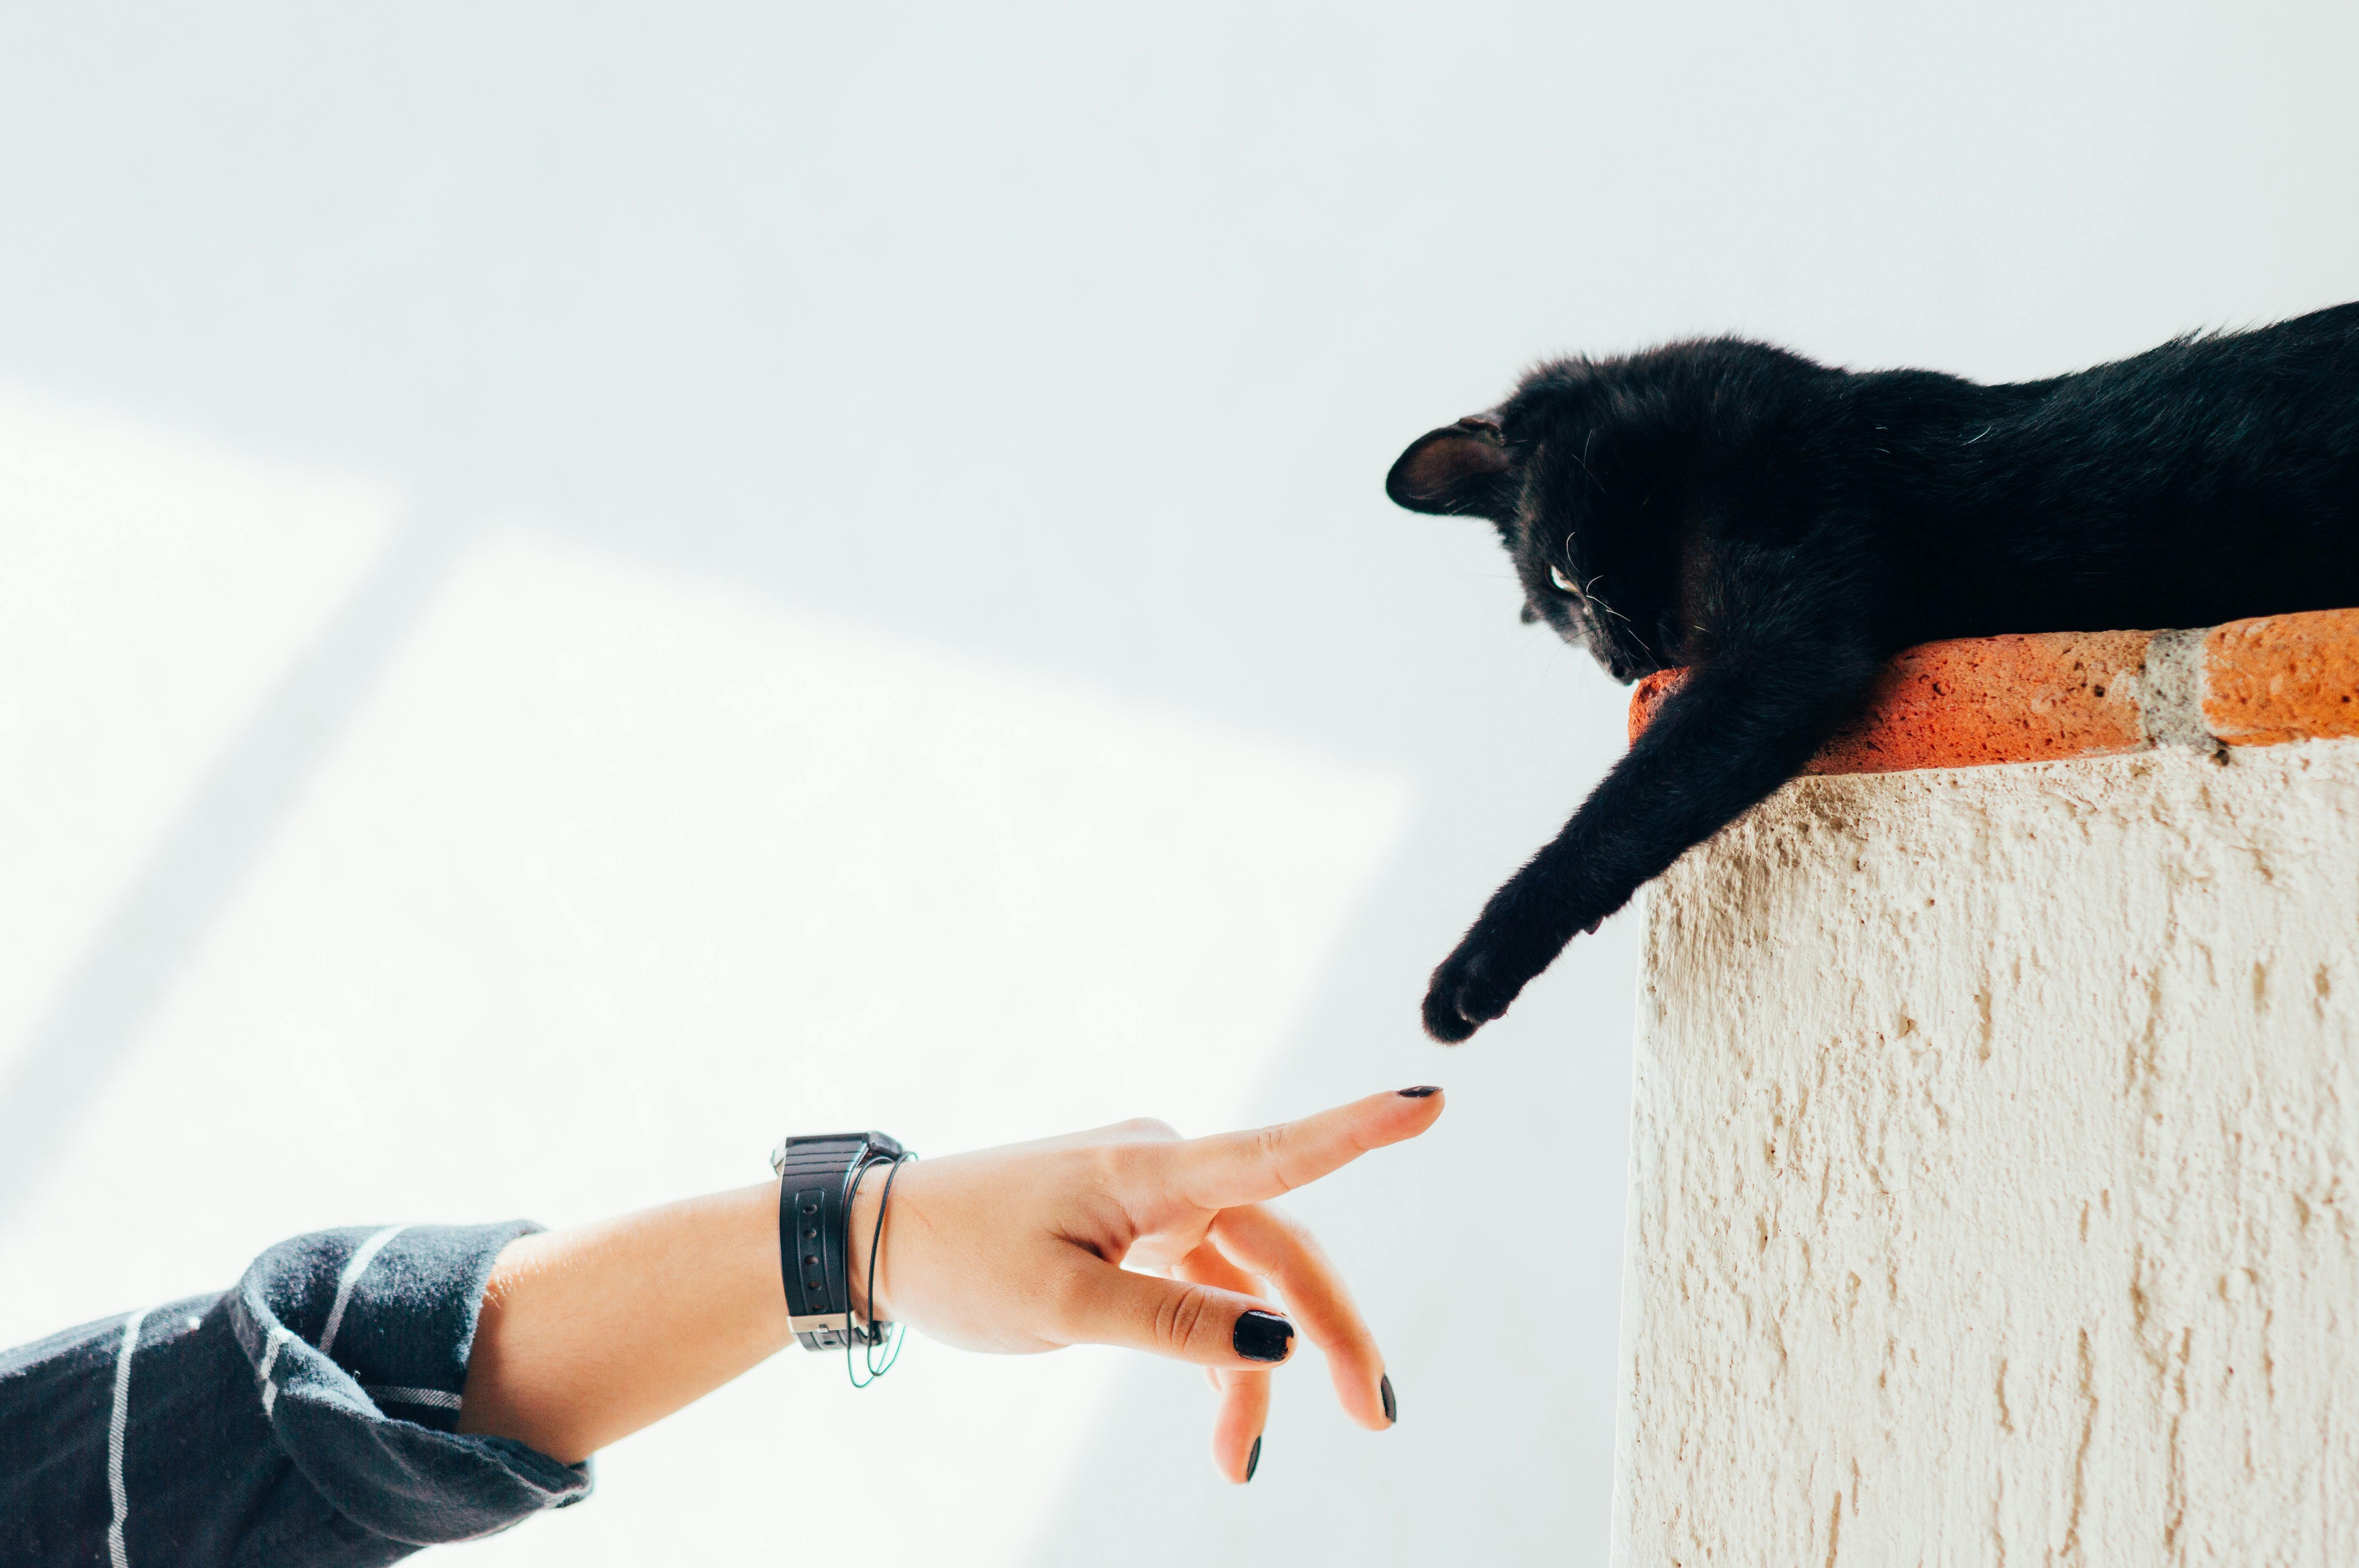 Black cat reaching paw out to touch a person's hand